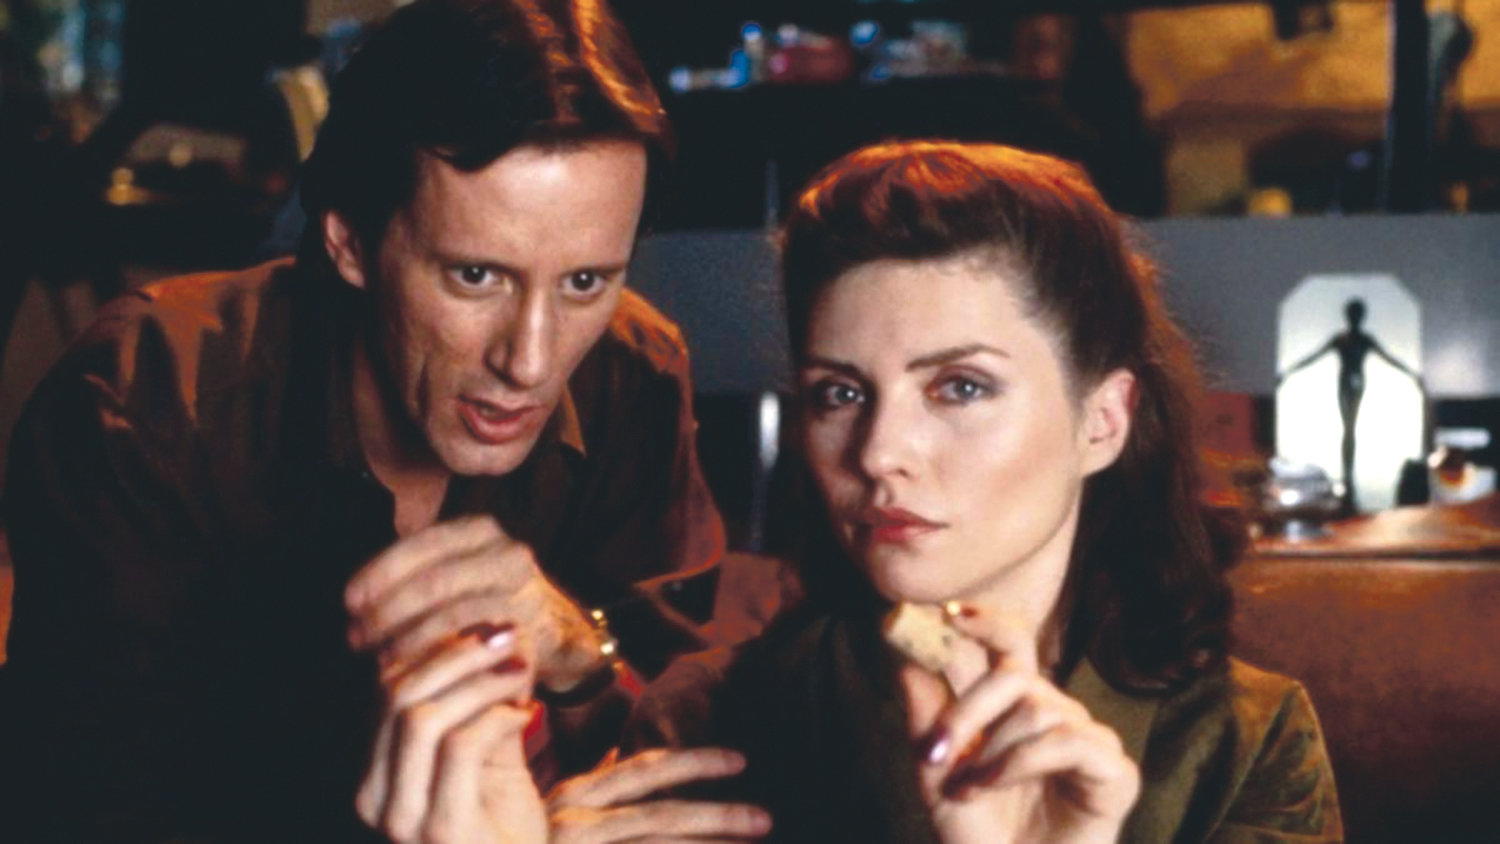 James Woods and Debbie Harry invite you to try a few things in David Cronenberg’s “Videodrome.”